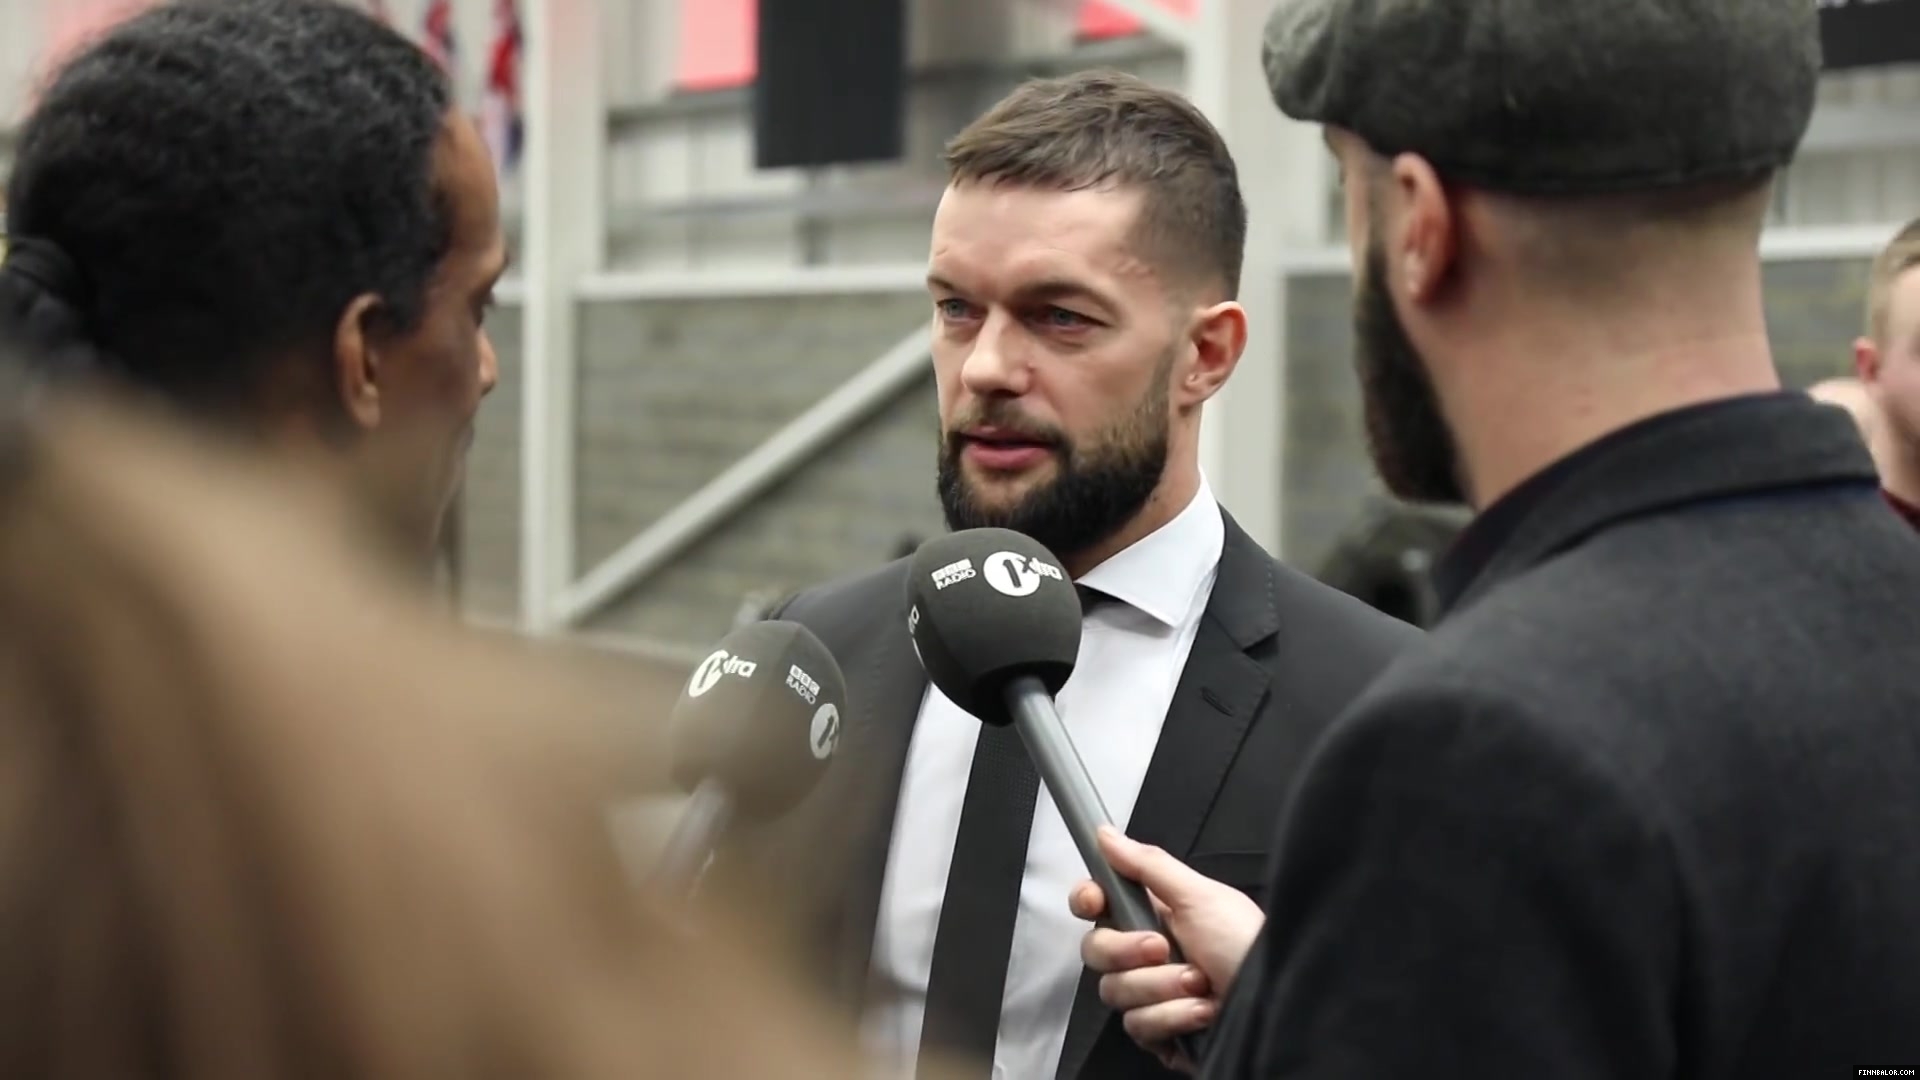 WWE_Superstar_FINN_BALOR_joins_MOUSTACHE_MOUNTAIN_at_the_opening_of_the_NXT_UK_PC_026.jpg